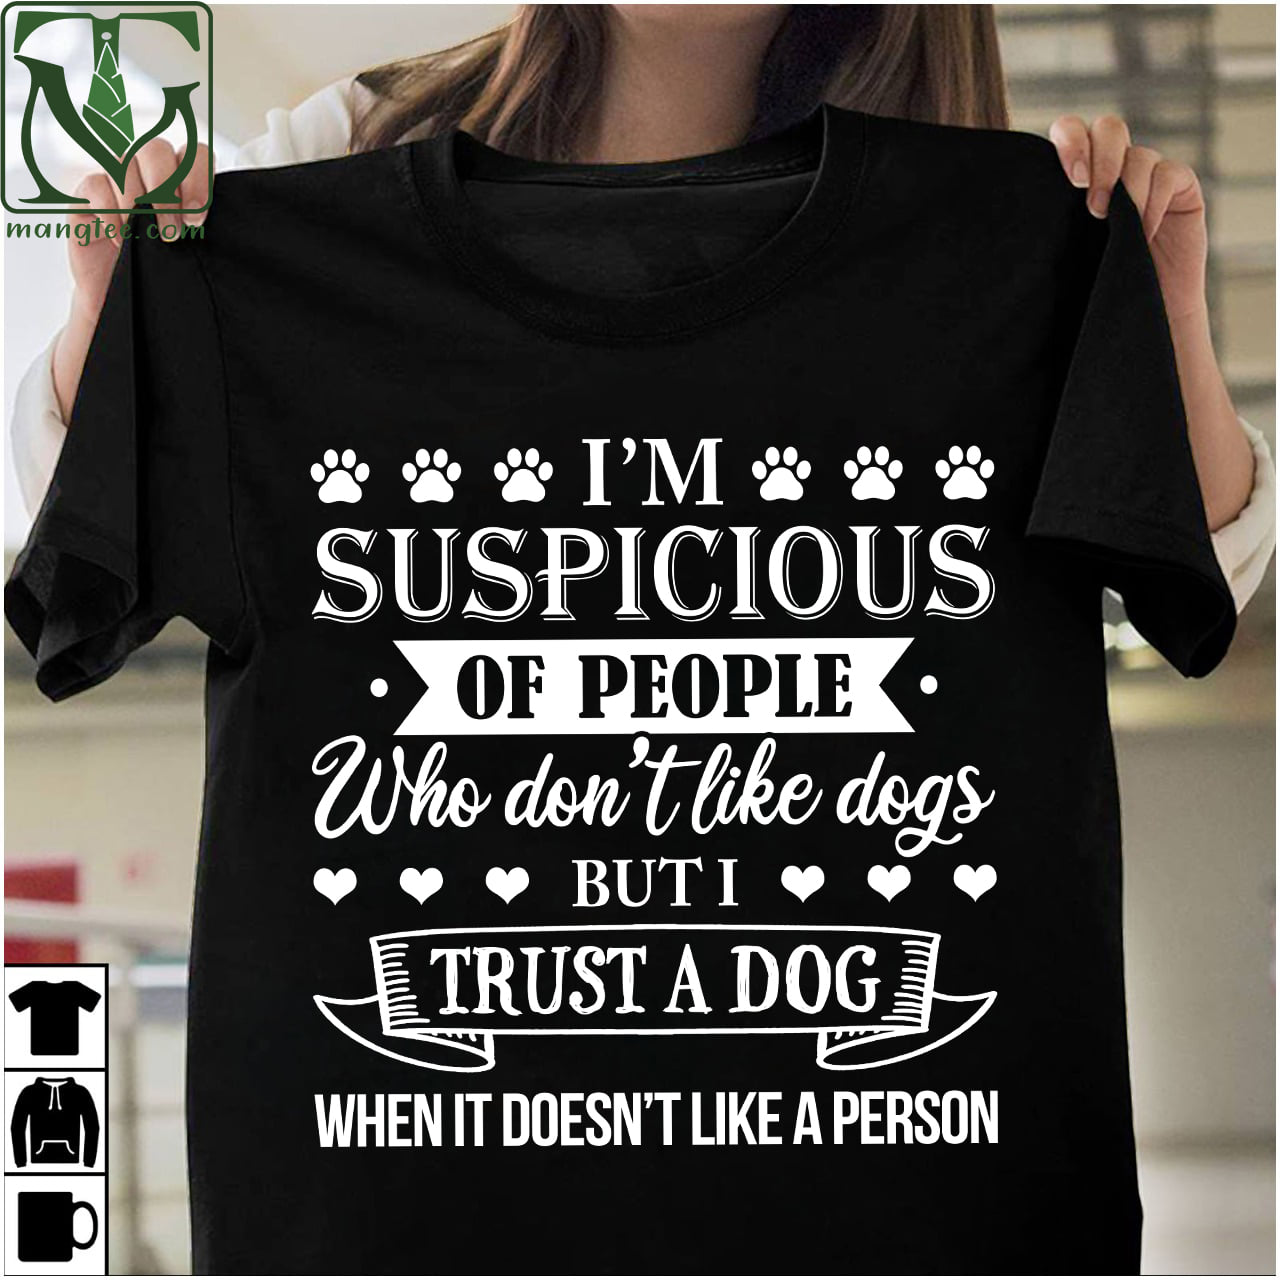 I'm suspicious of people who don't like dogs but I trust a dog